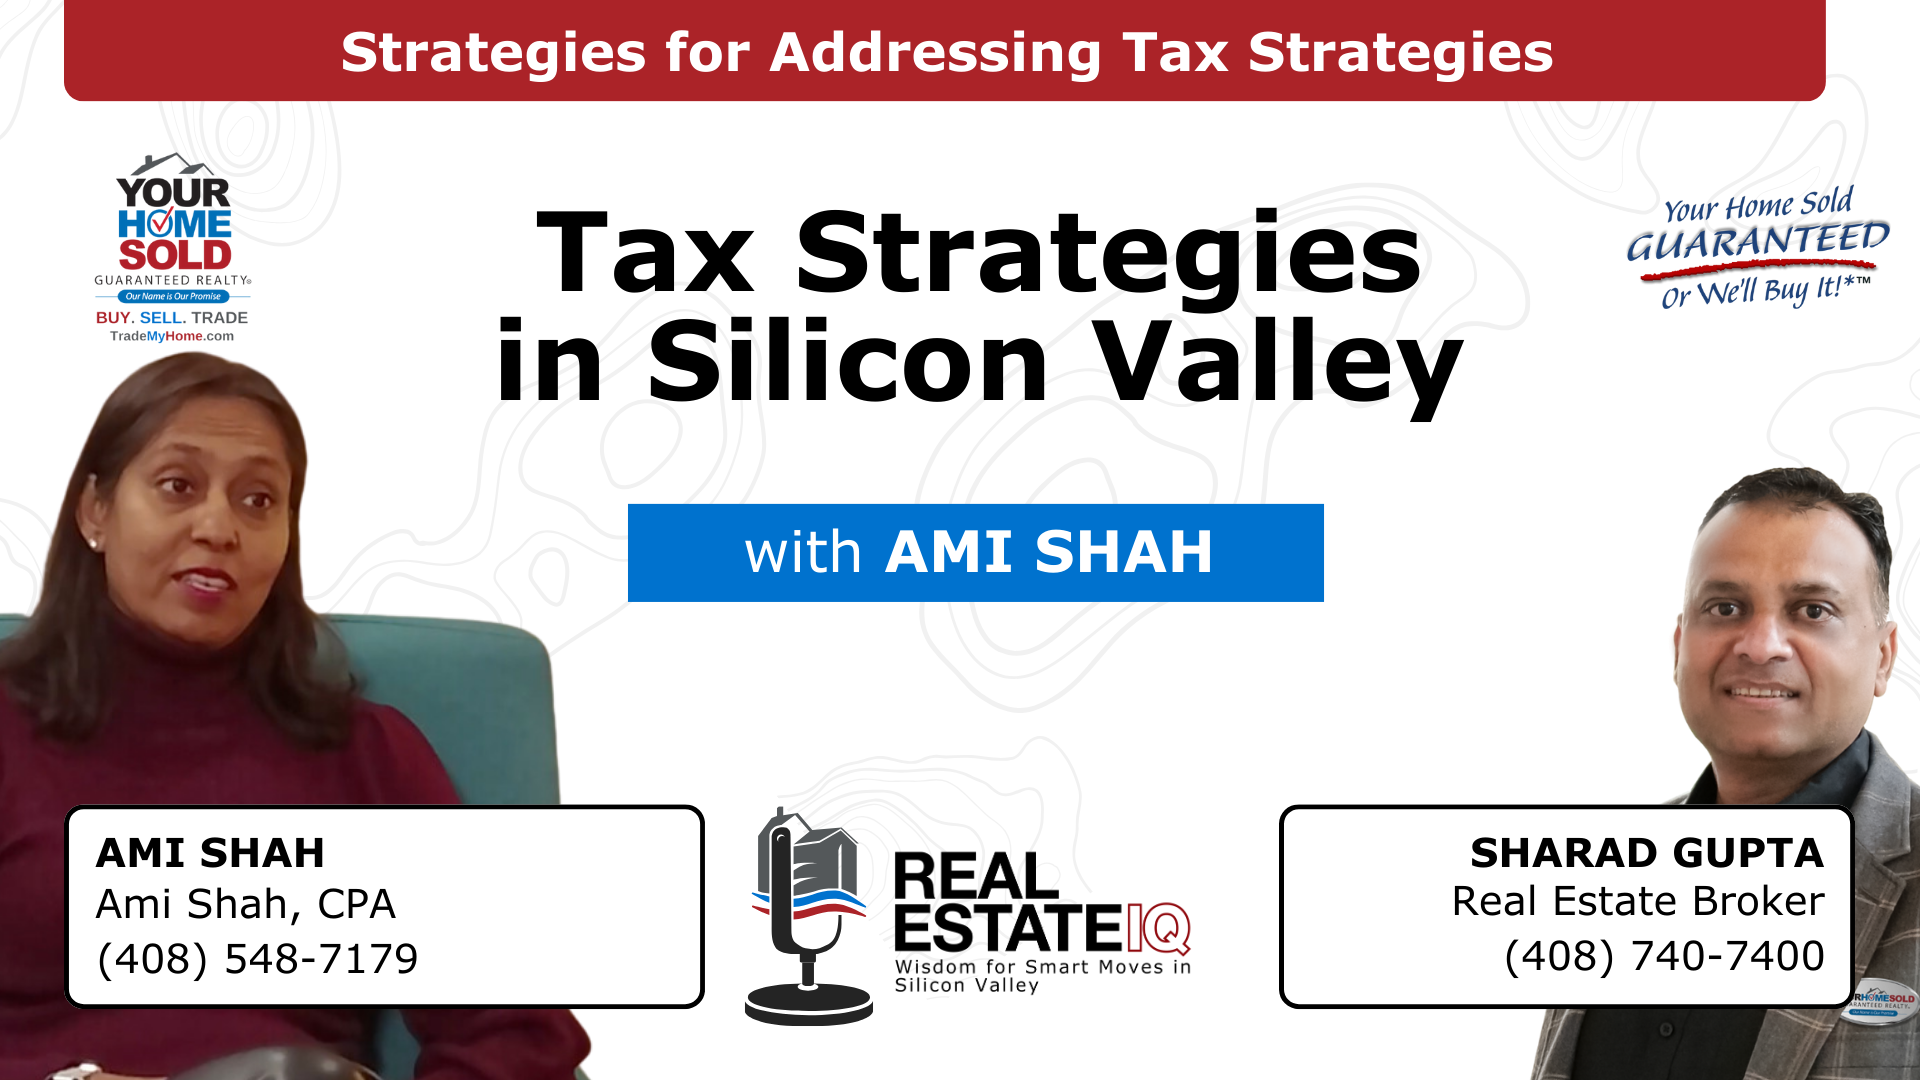 Tax Strategies: Addressing Silicon Valley’s Tax Challenges and Strategies Video